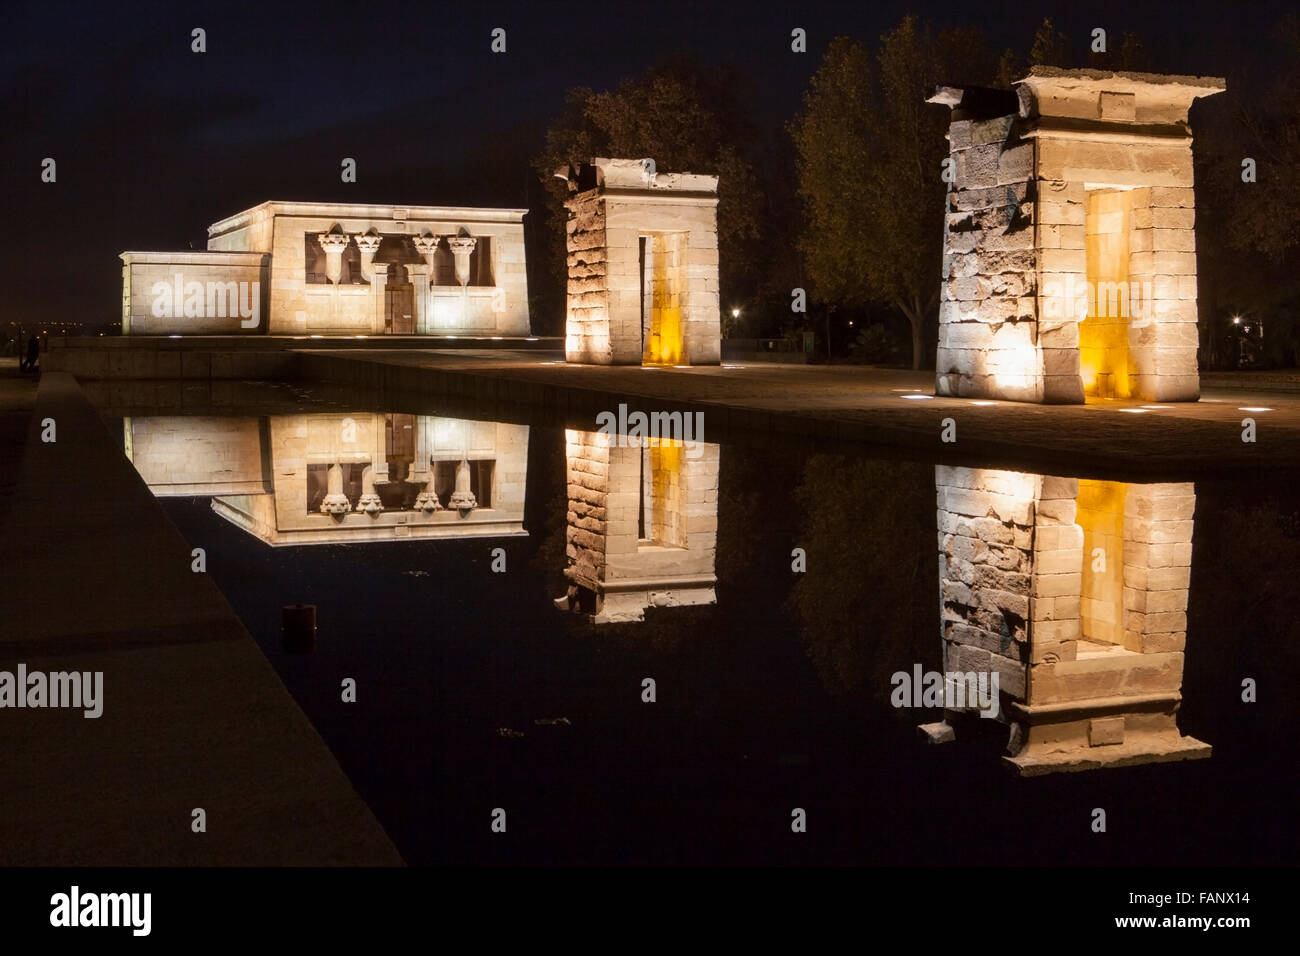 Temple of Debod at night. Ancient Egyptian temple which was dismantled and rebuilt in Madrid, Spain Stock Photo